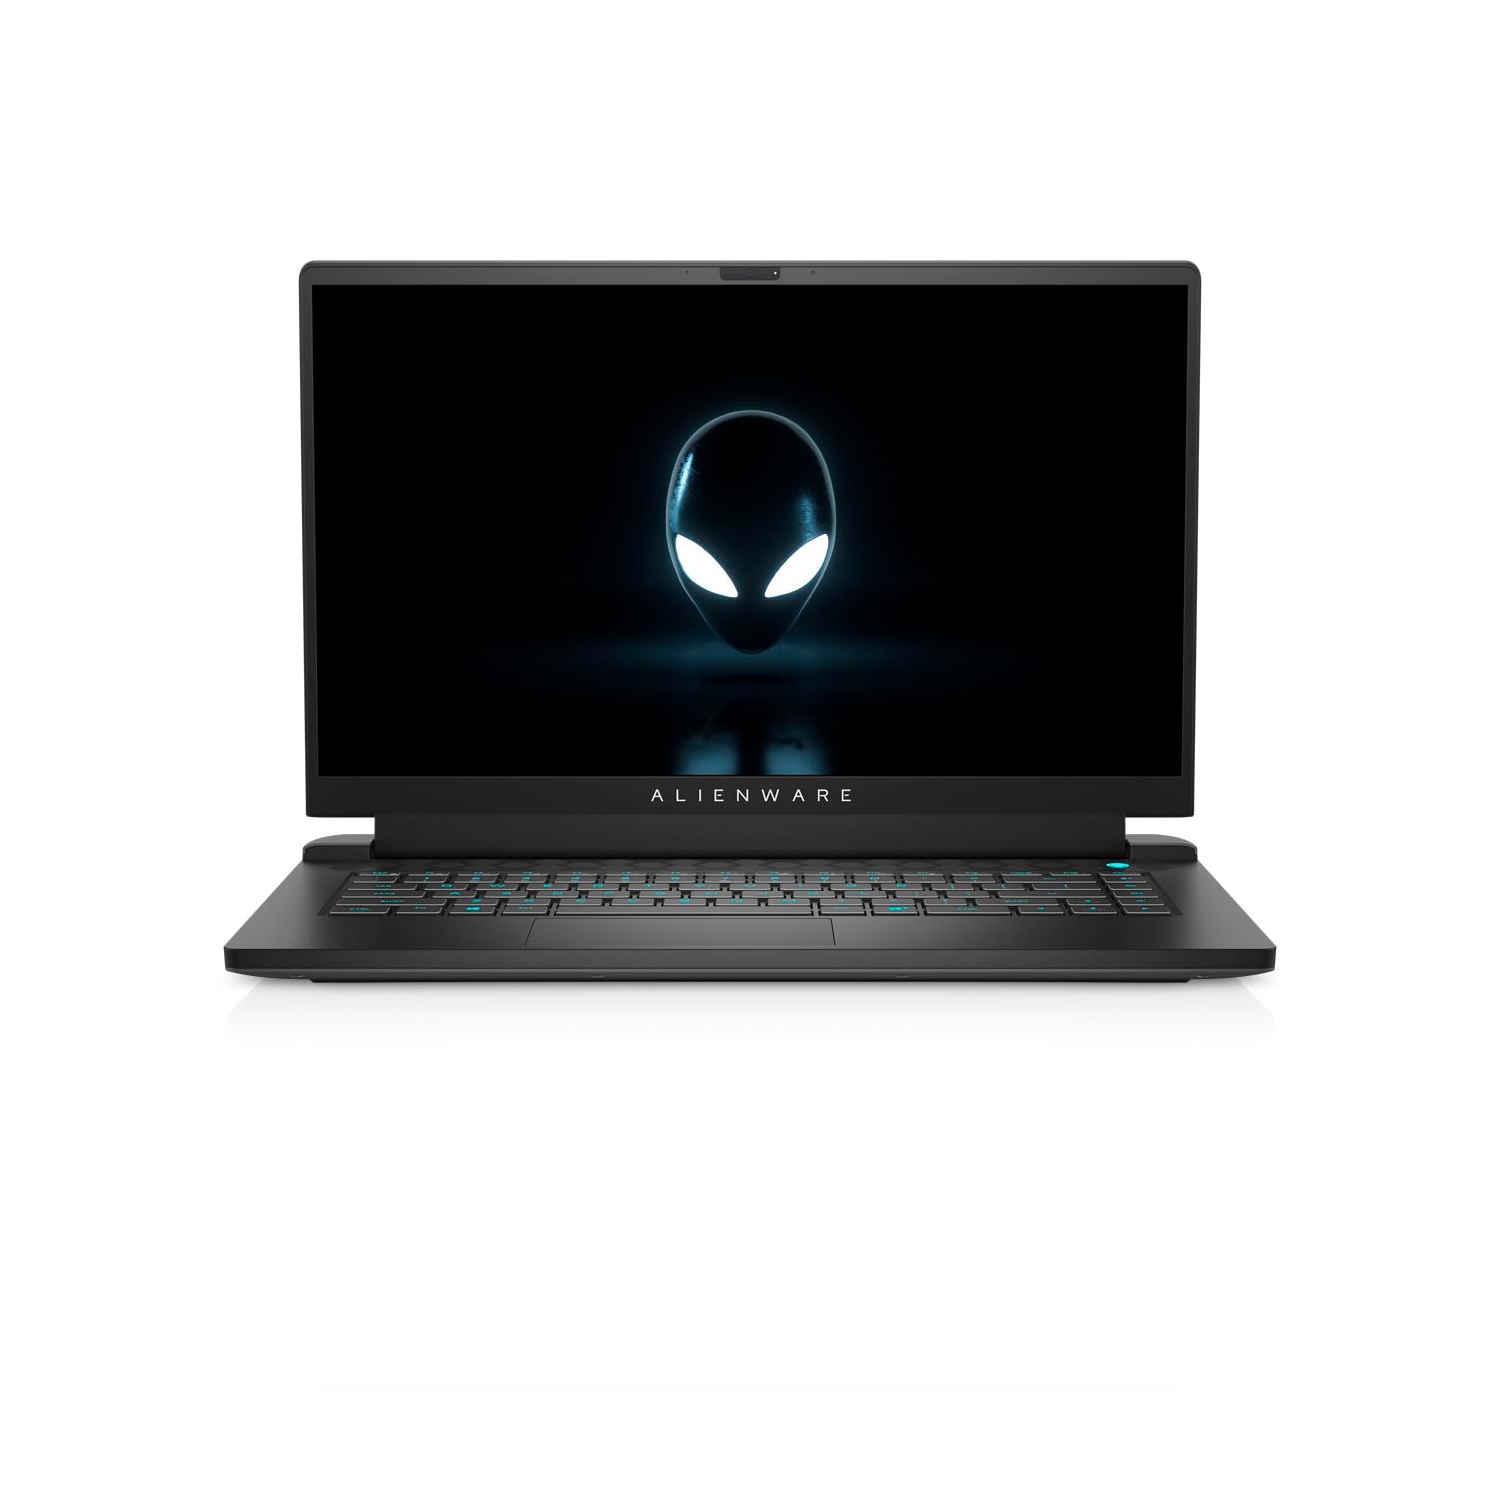 Refurbished (Excellent) - Dell Alienware m15 R5 Ryzen Edition Gaming Laptop (2021), 15.6" FHD, Core Ryzen 7, 256GB SSD, 16GB RAM, 3050 Ti, 8 Cores @ 4.4 GHz Certified